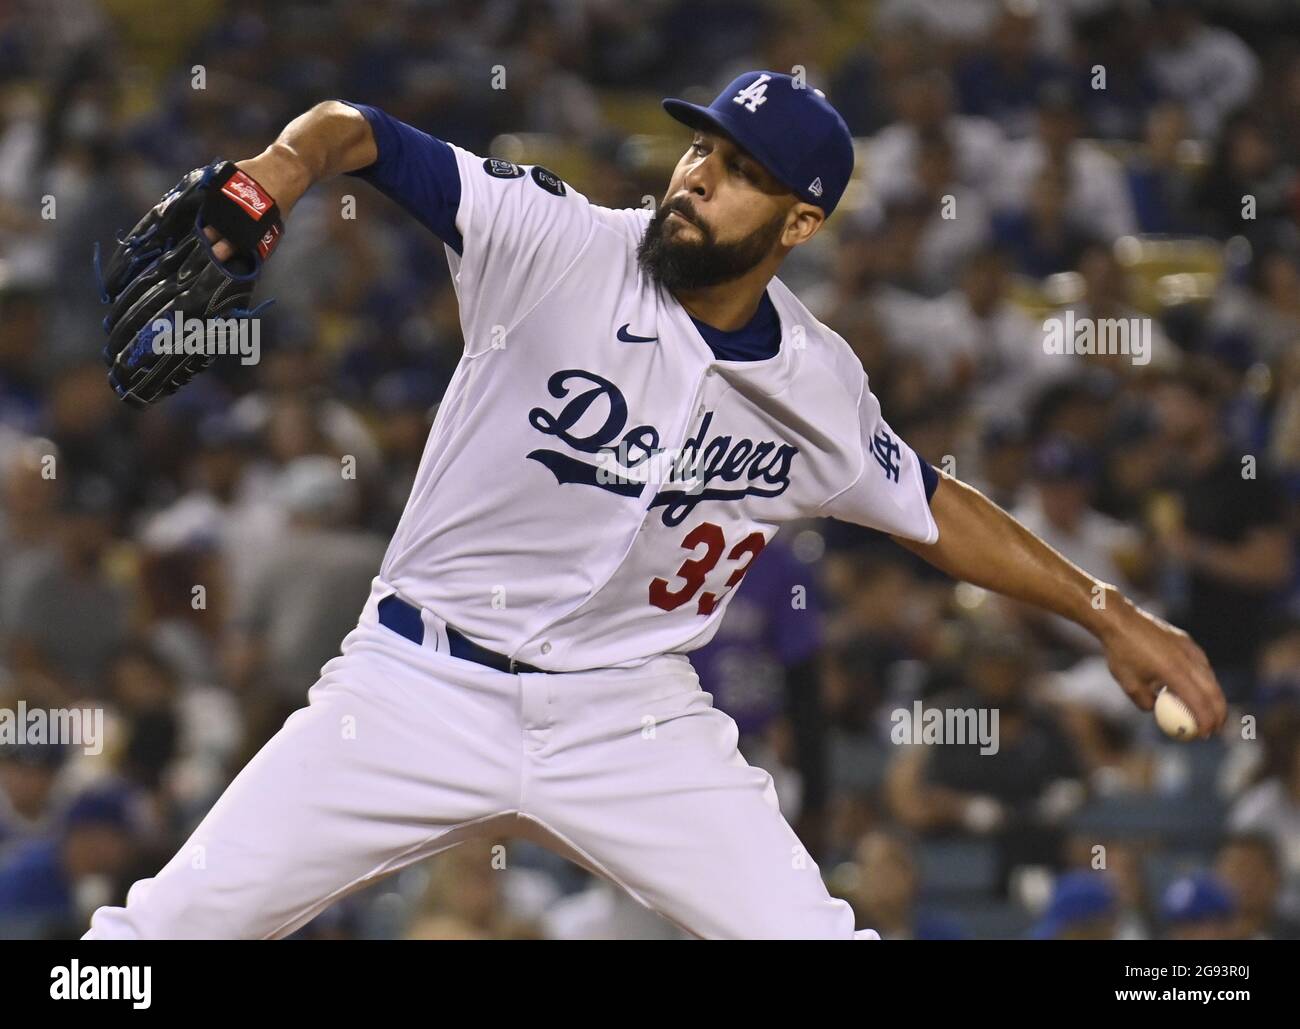 Los Angeles, USA. 24th July, 2021. Los Angeles Dodgers' starting pitcher David Price winds up to deliver against the Colorado Rockies at Dodger Stadium in Los Angeles on Friday, July 23, 2021. The Rockies defeated the Dodgers 9-6, It was the Dodgers' third straight game in which the bullpen could not hold a late lead. Photo by Jim Ruymen/UPI Credit: UPI/Alamy Live News Stock Photo